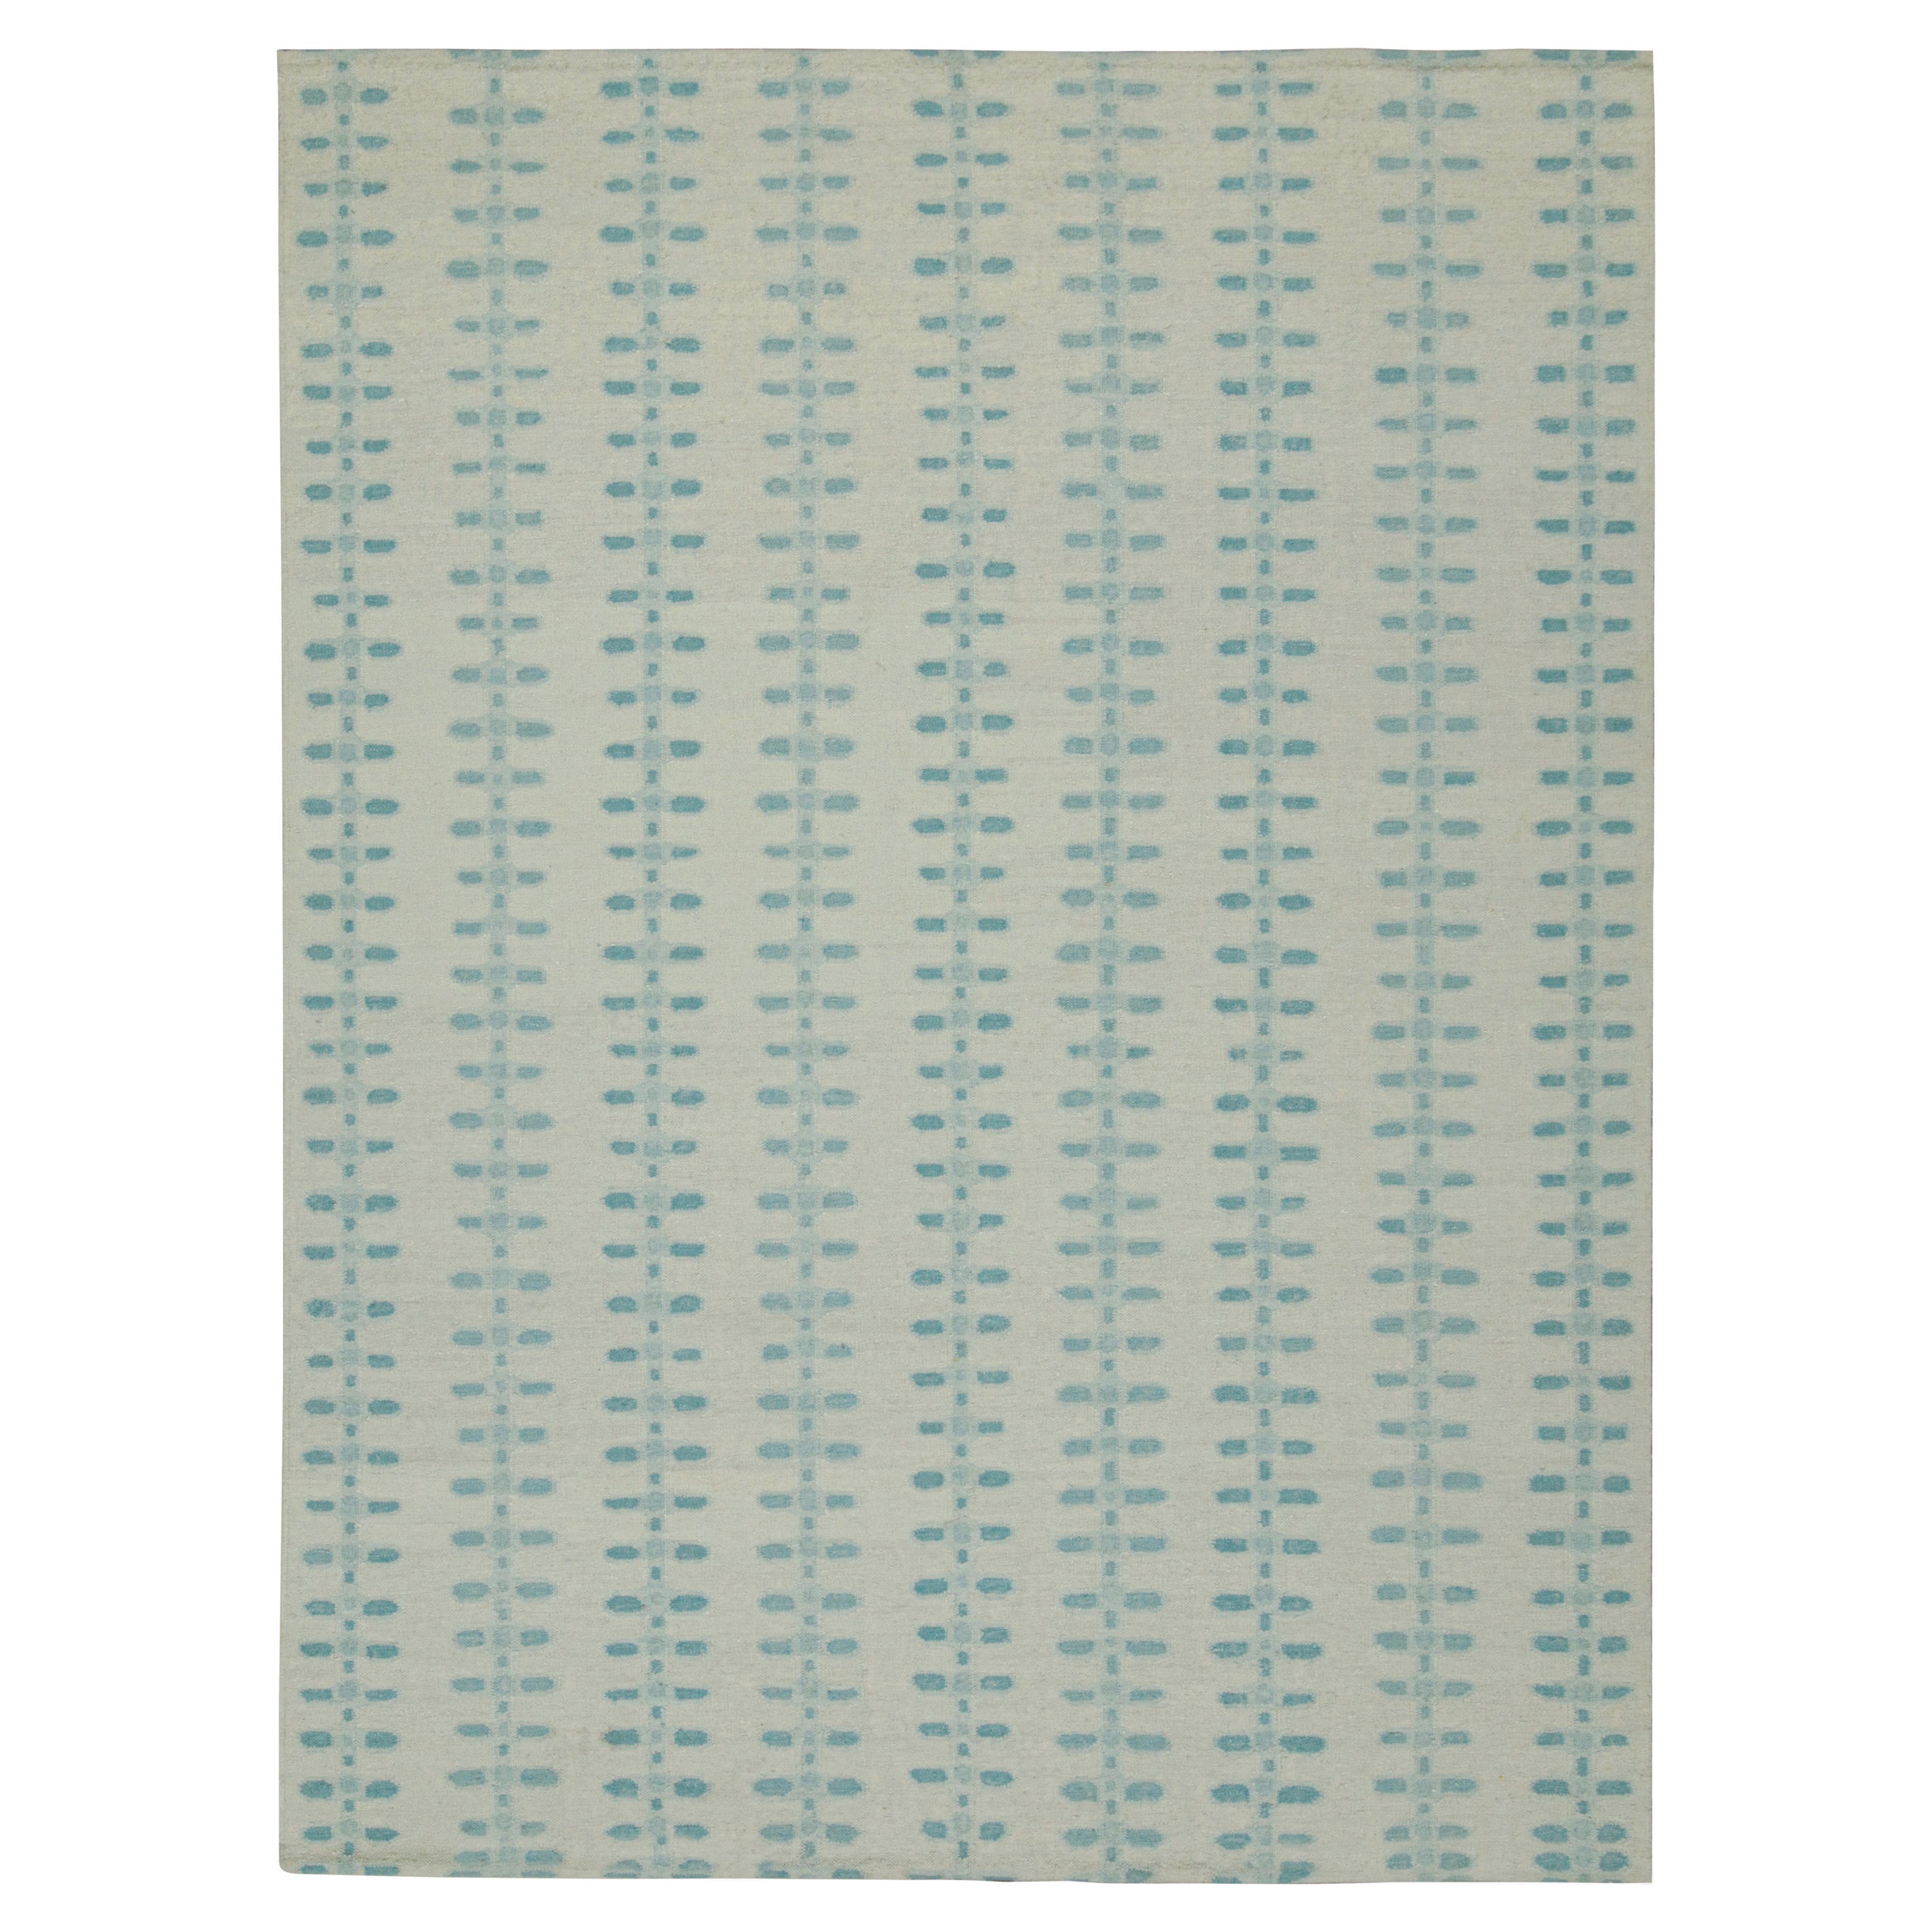 Rug & Kilim’s Scandinavian Style Kilim with Patterns in Tones of Blue & Gray For Sale